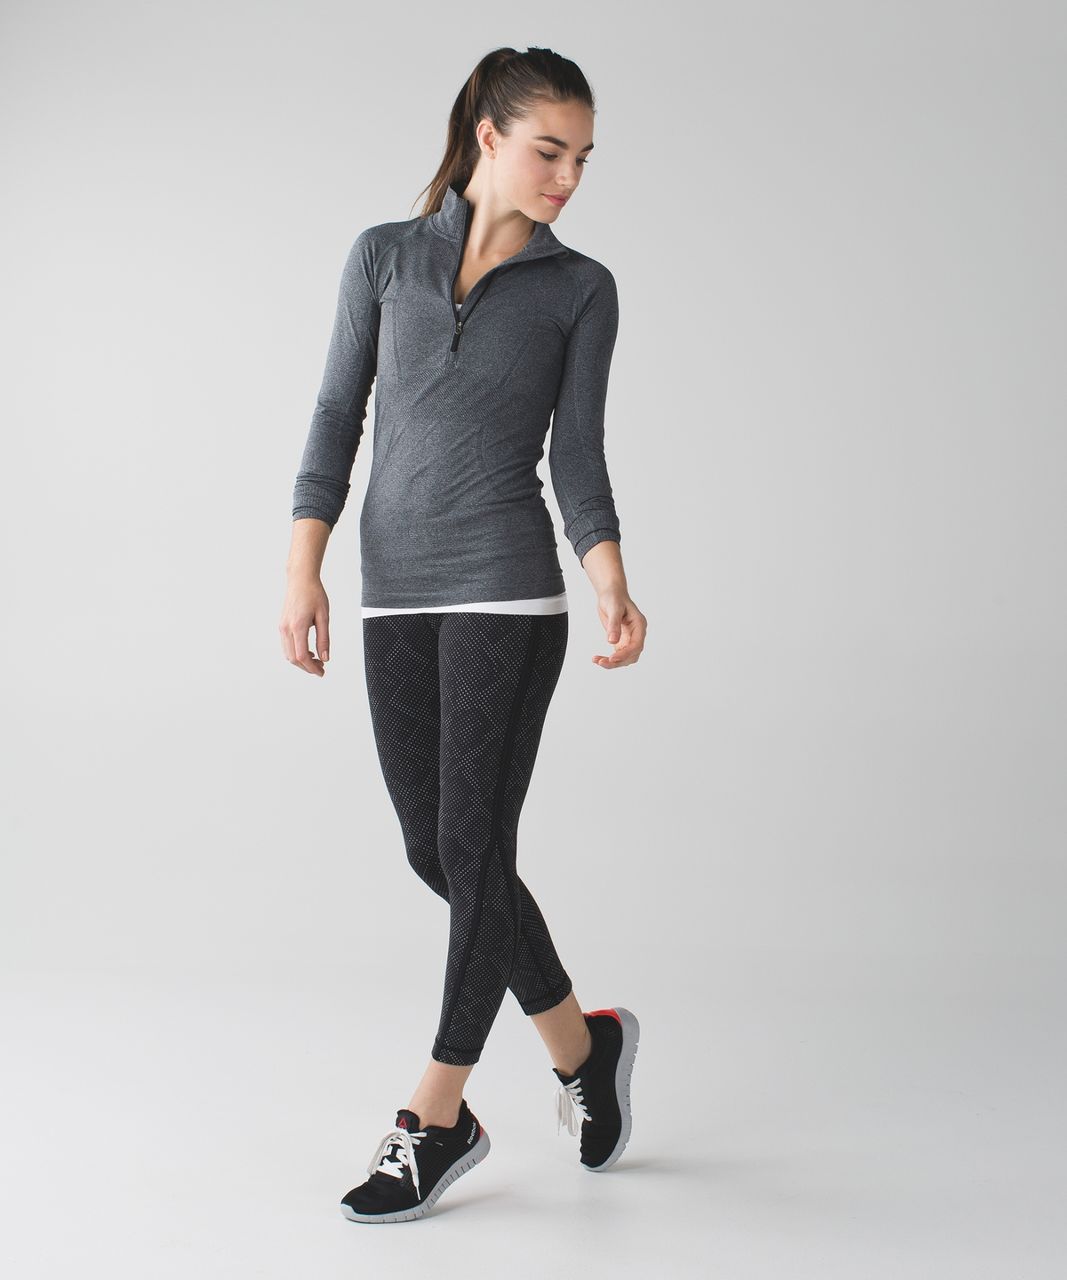 Lululemon Pace Tight (Full-On Luxtreme) *Lights Out - Black / Ravish Reptile Silver Black